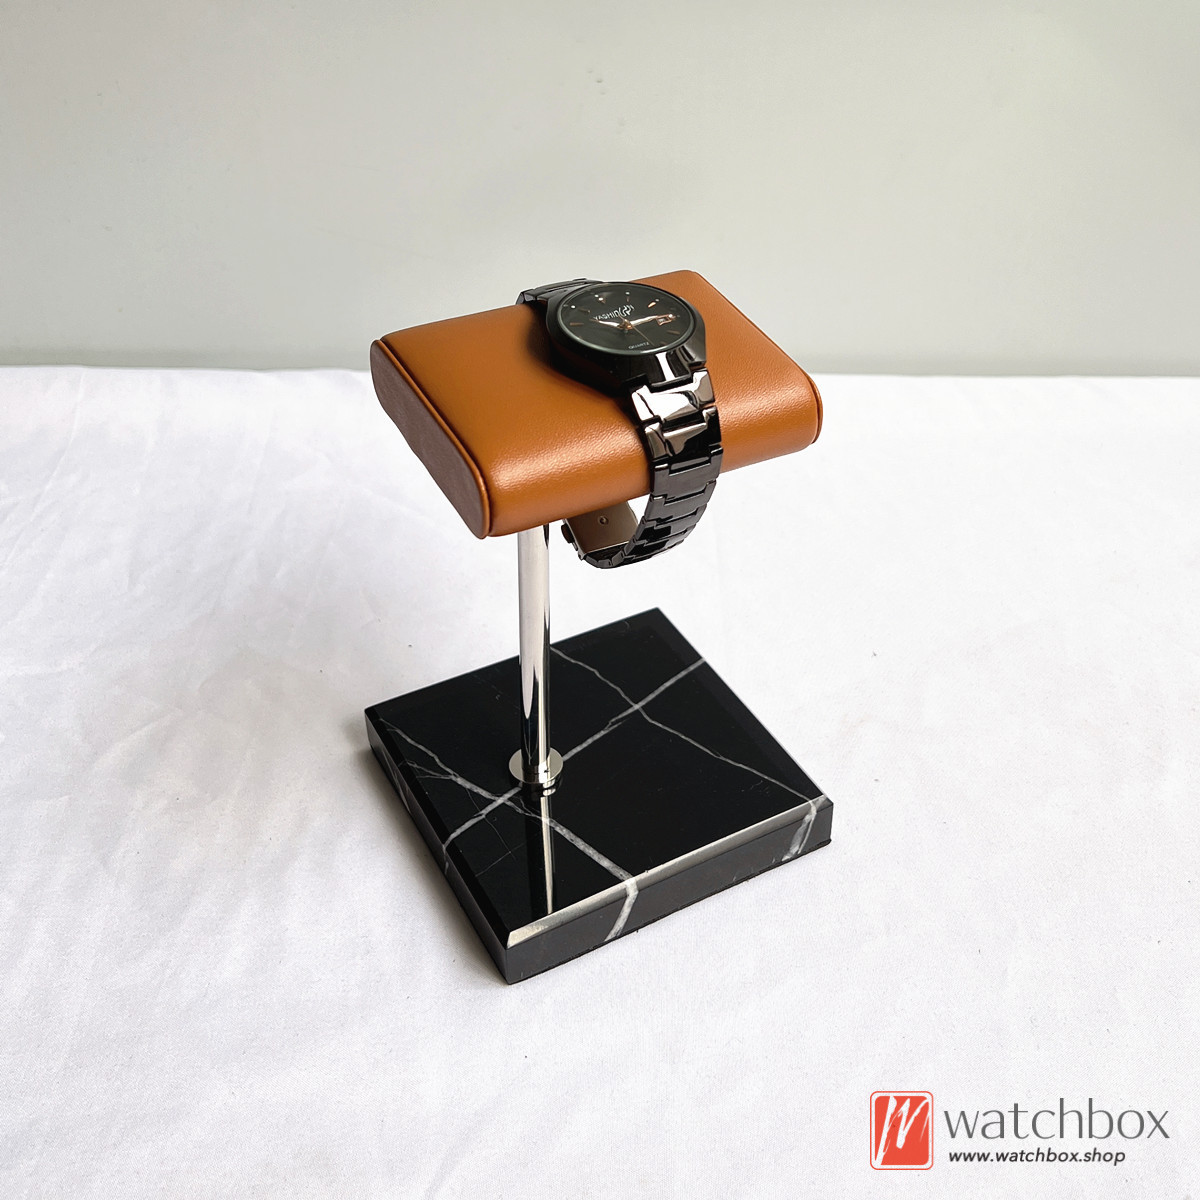 The Black Marble Base PU Leather Watch Jewelry Case Holder Counter Display Stand